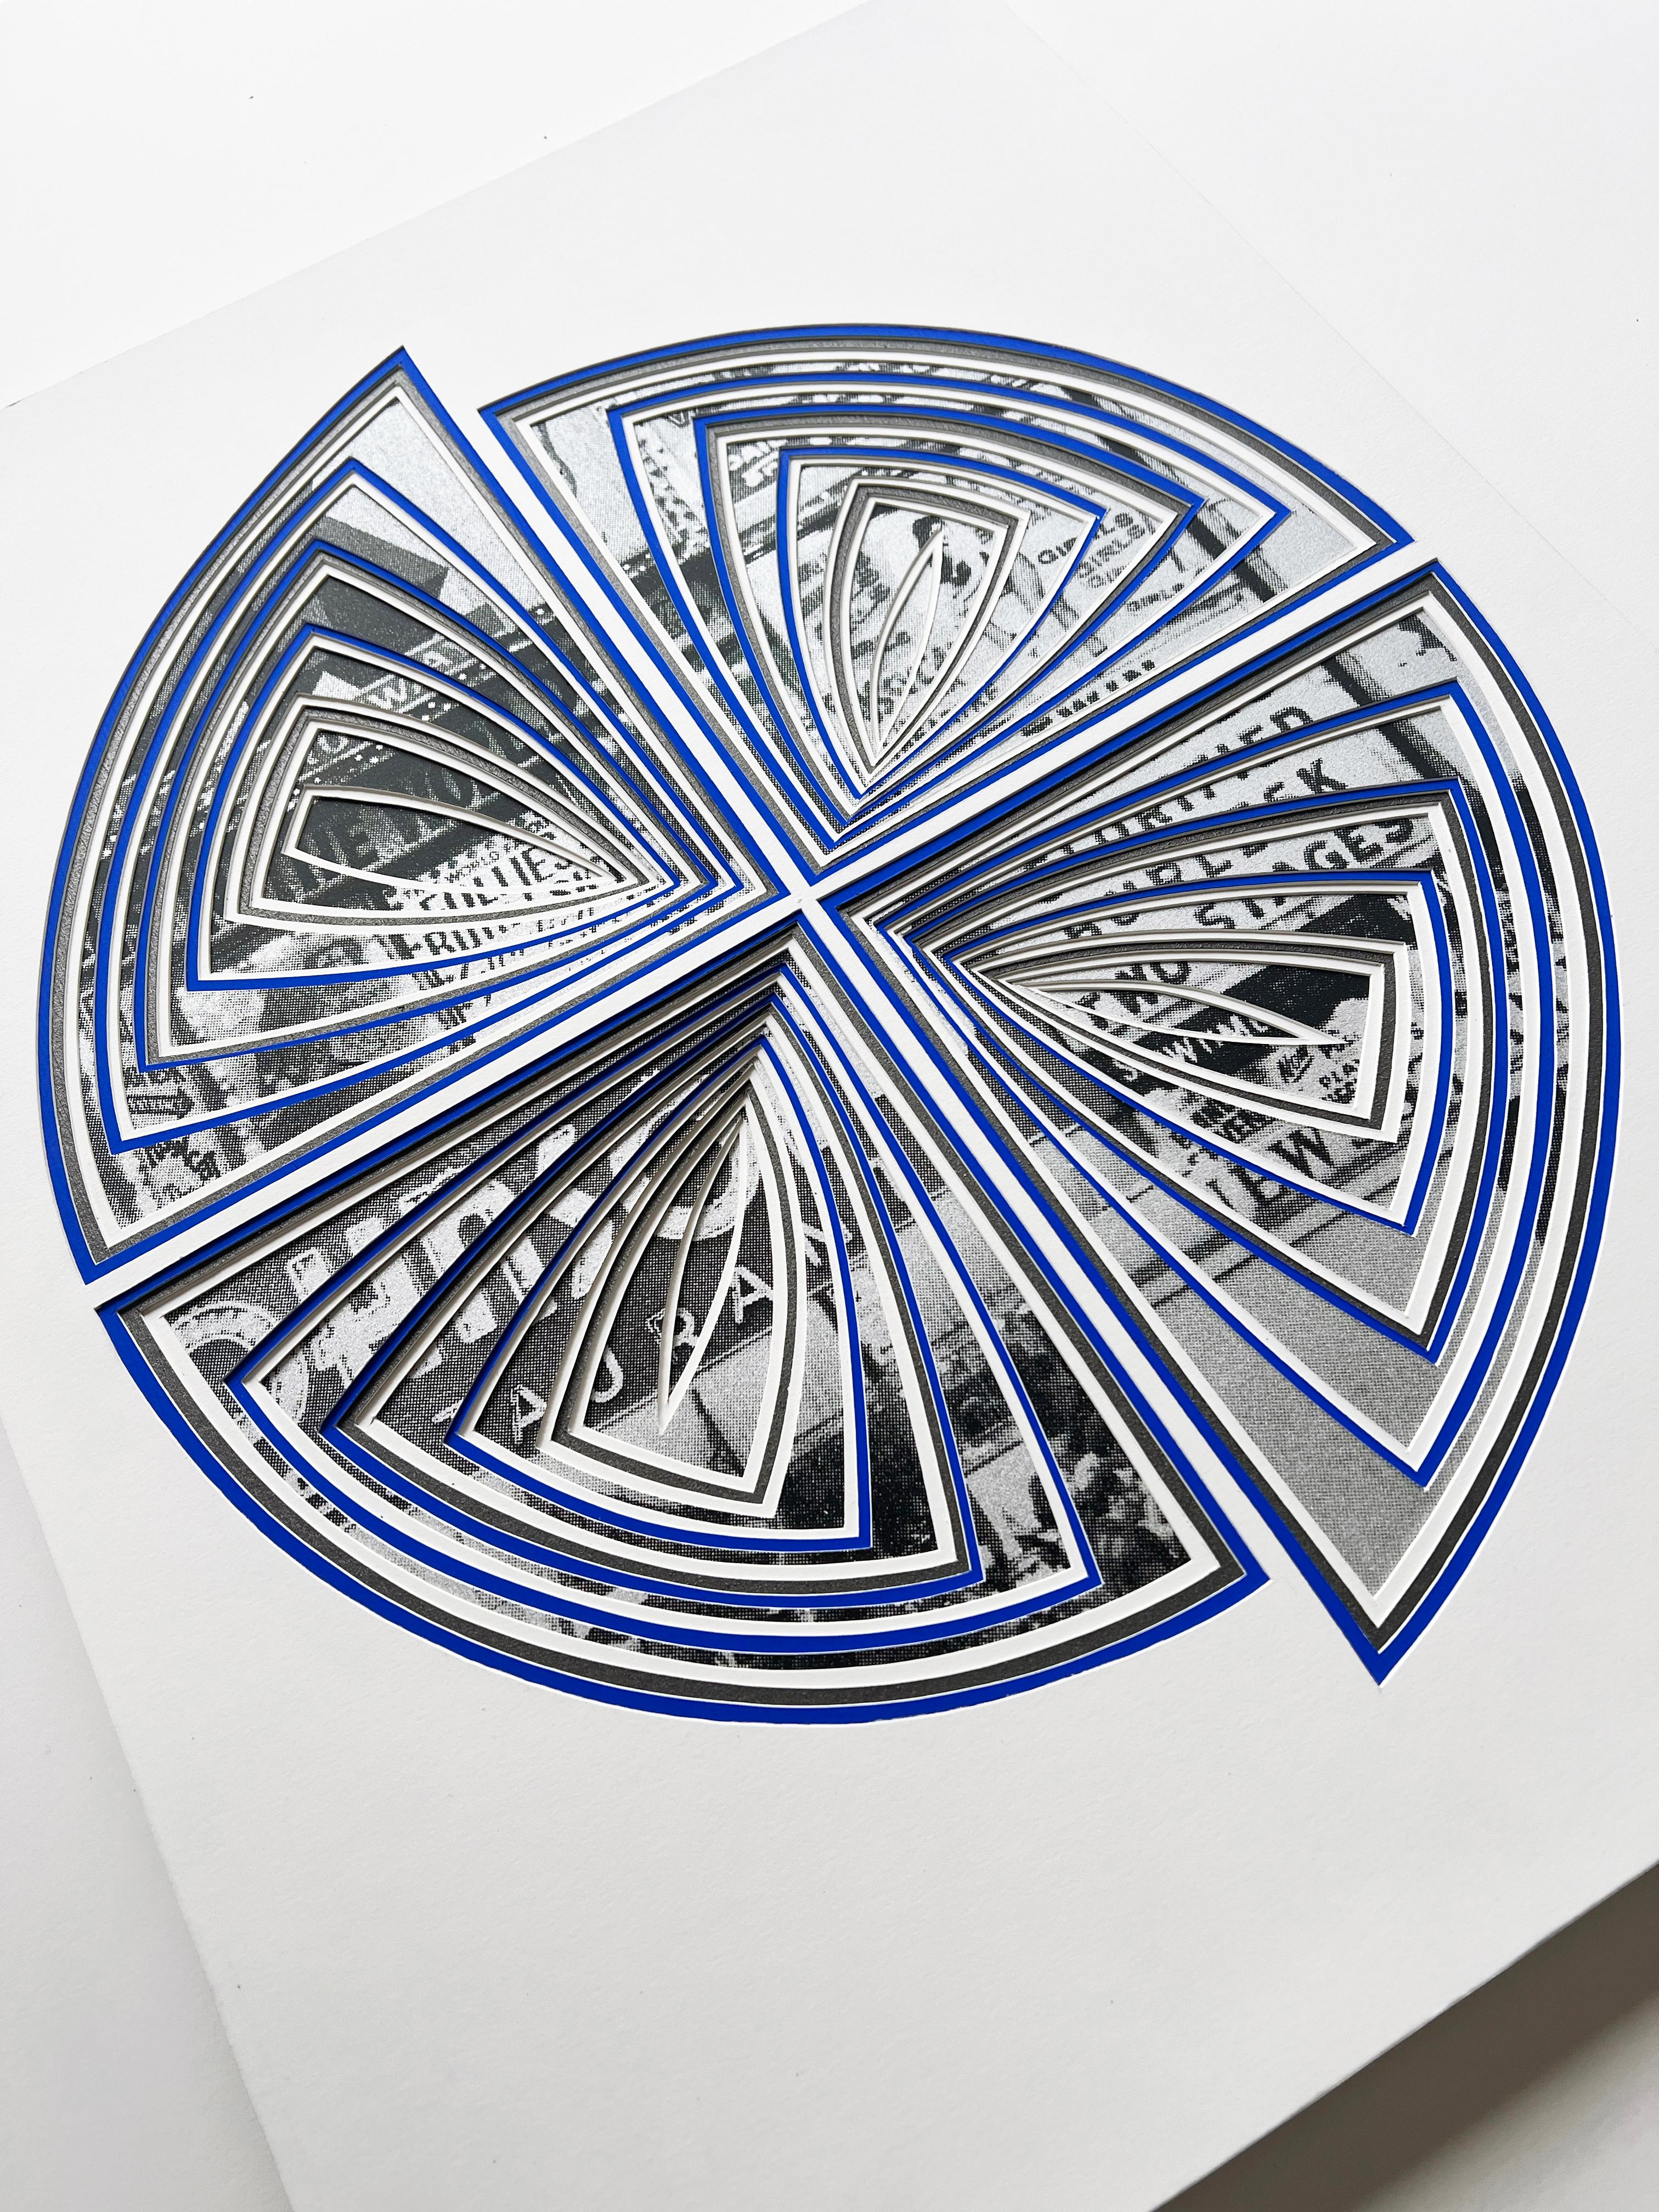 Elizabeth Gregory-Gruen’s Cut Work series is a free hand paper cutting process that charts the contours of our ever-changing emotional experience through the movement of form, line, and color. 

     Using free hand scalpel-cut multilayered imagery,